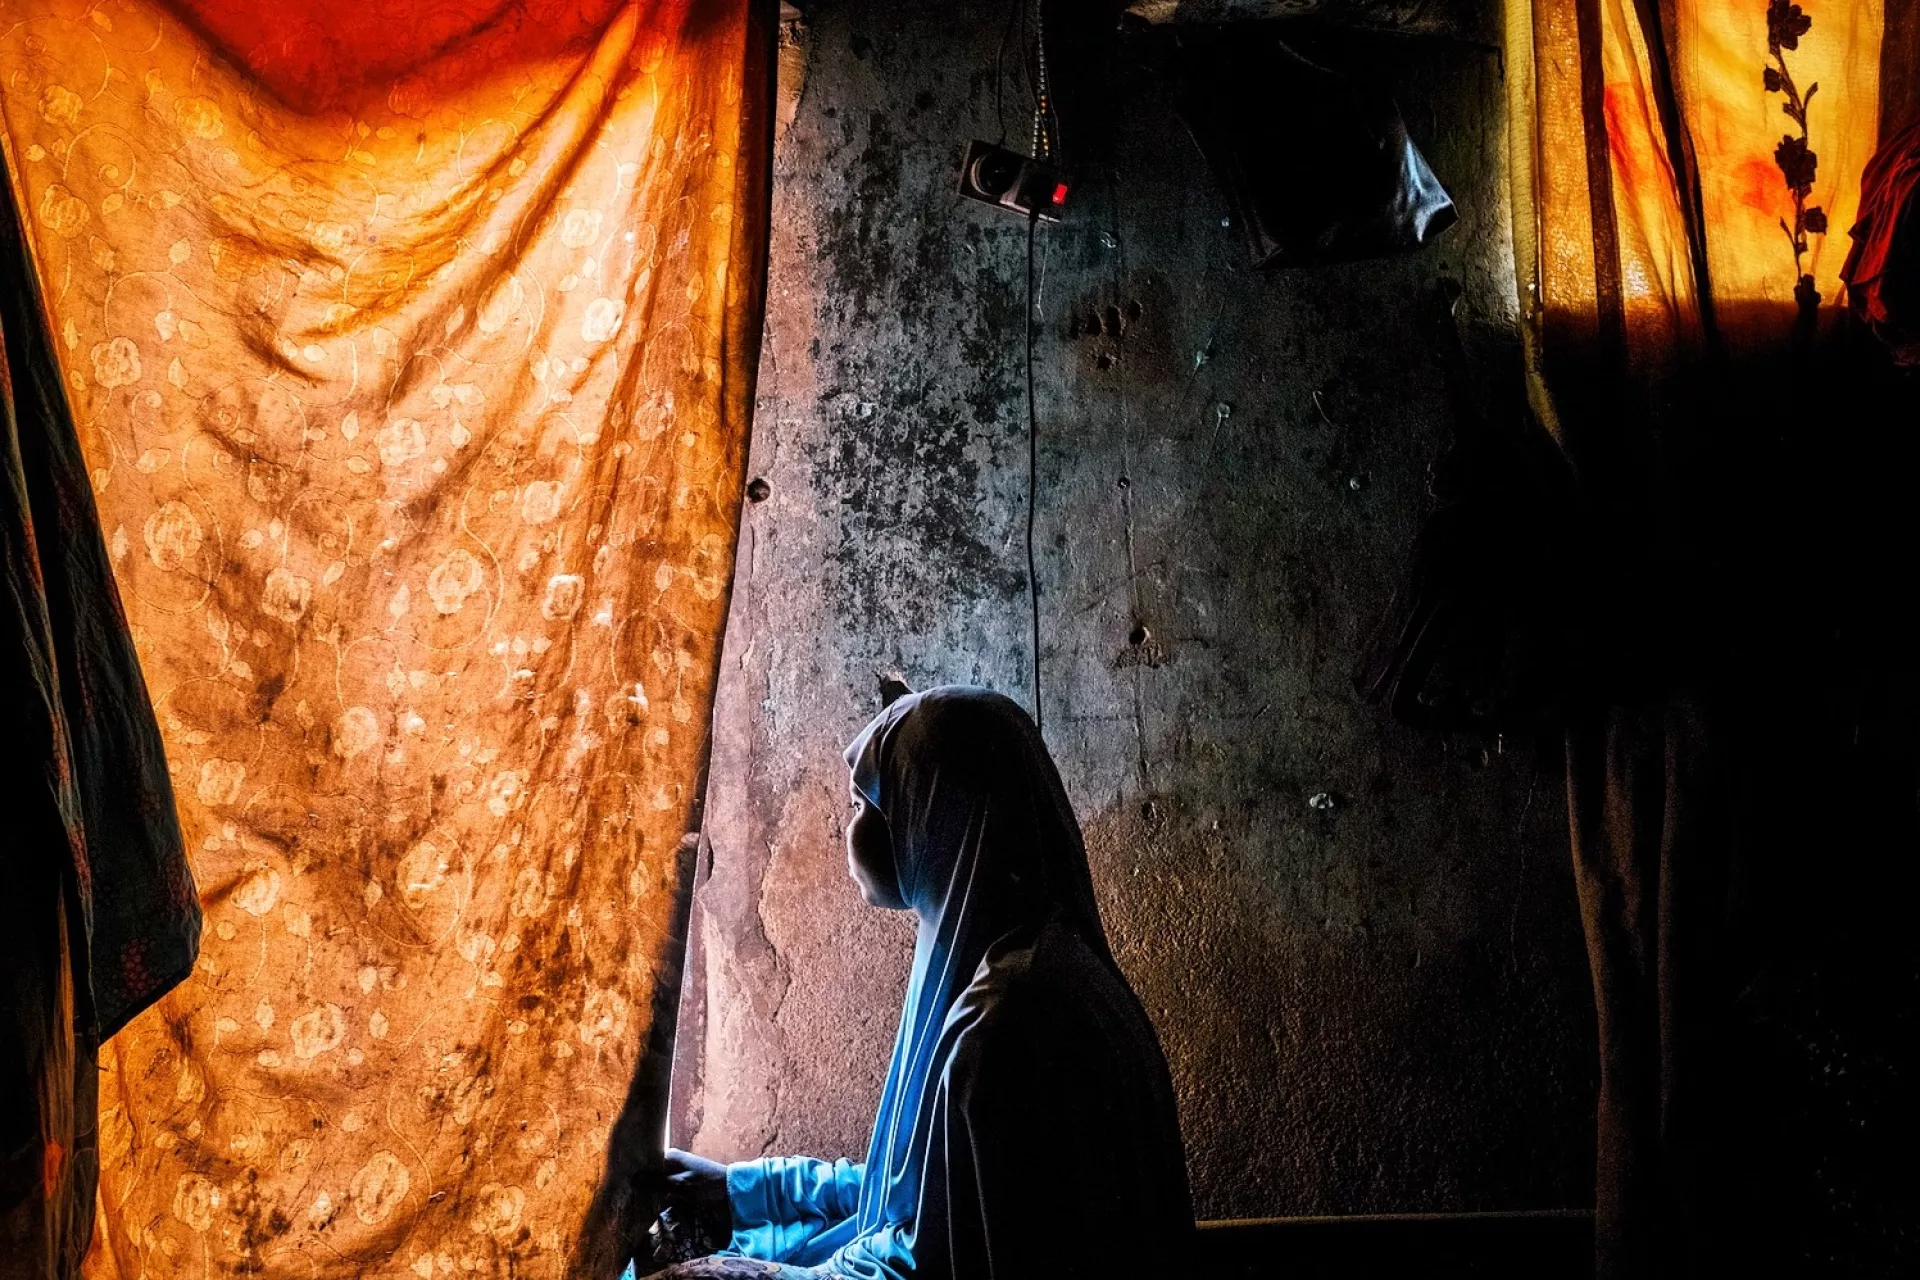 A girl looks out of a window in northeast Nigeria